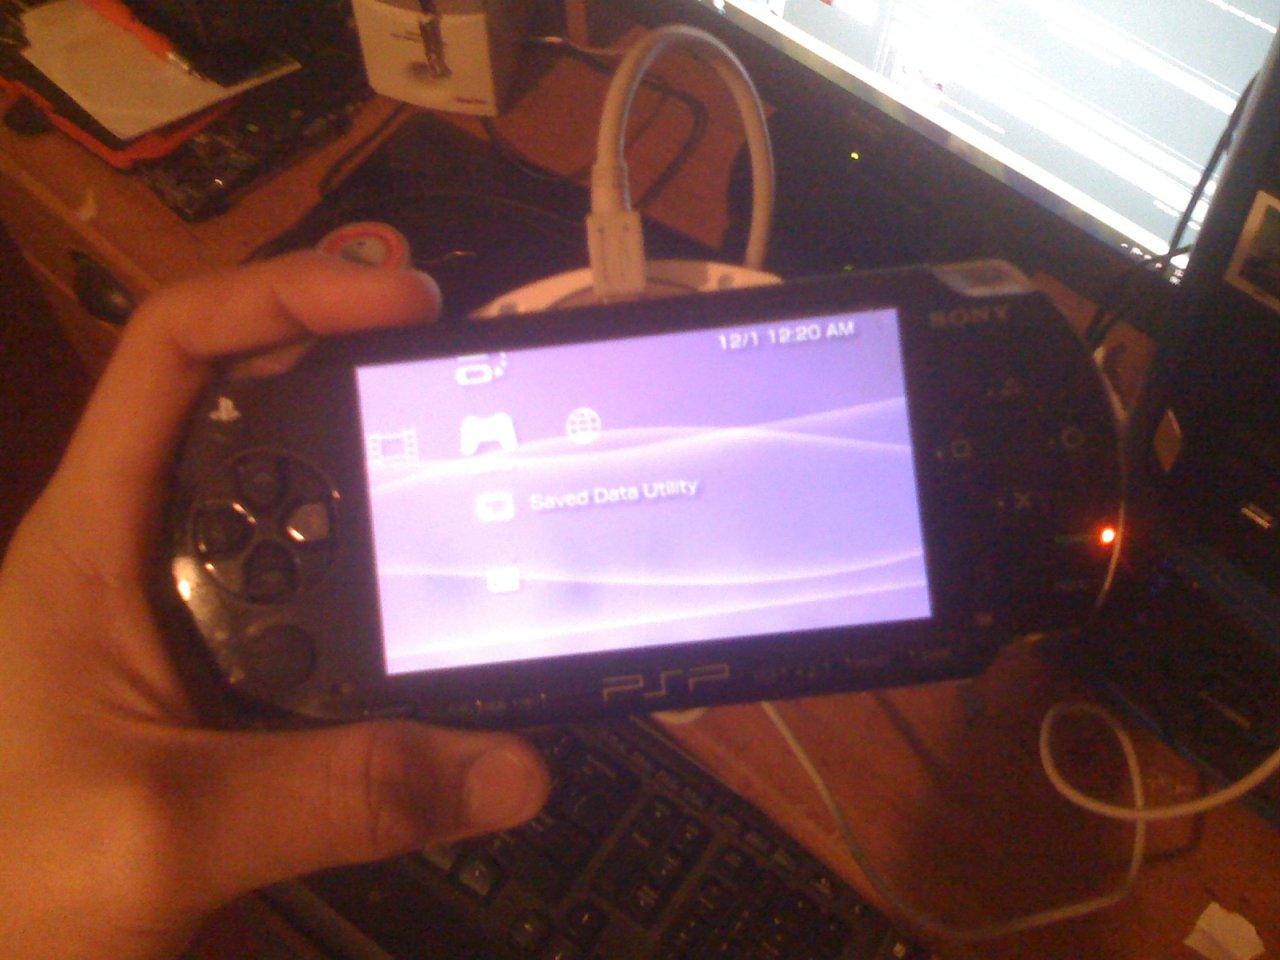 Can I update my PSP through USB?